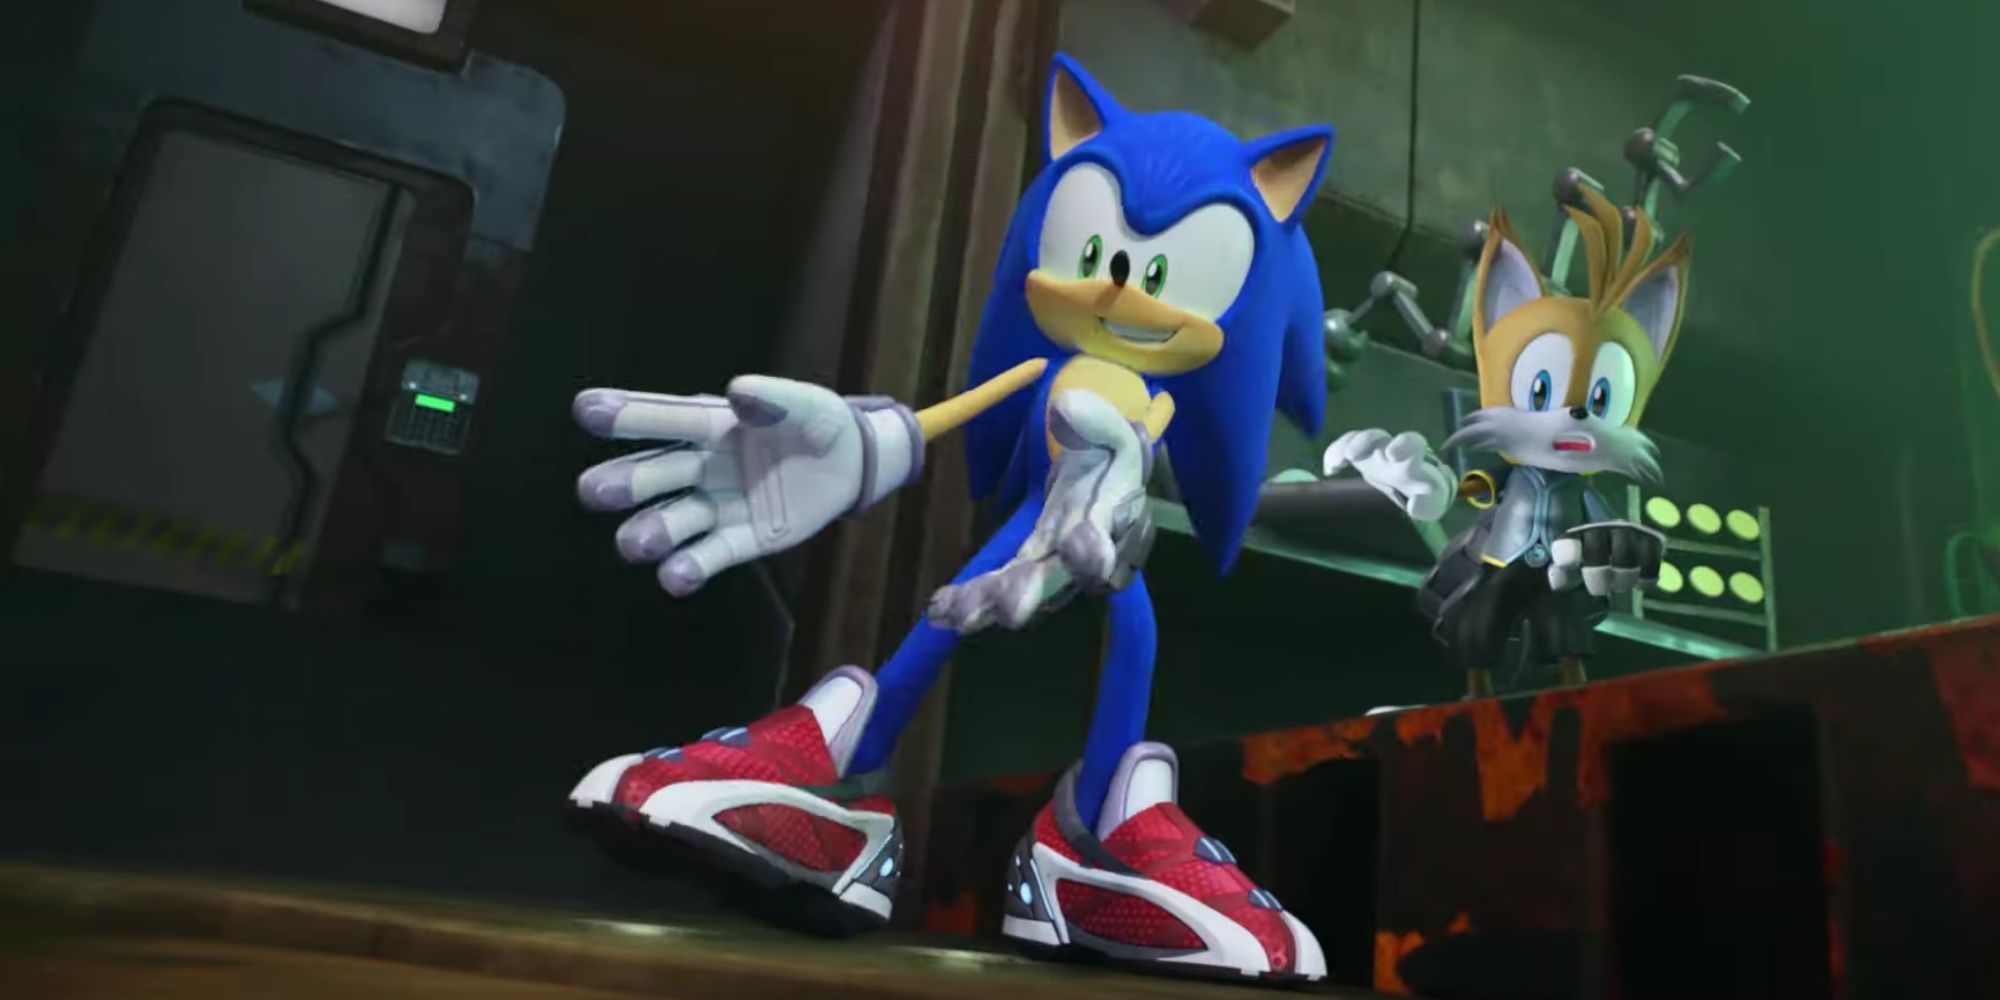 Sonic Prime is a suitable treat we recommend enjoying at a semi-slow pace -  Gamepur